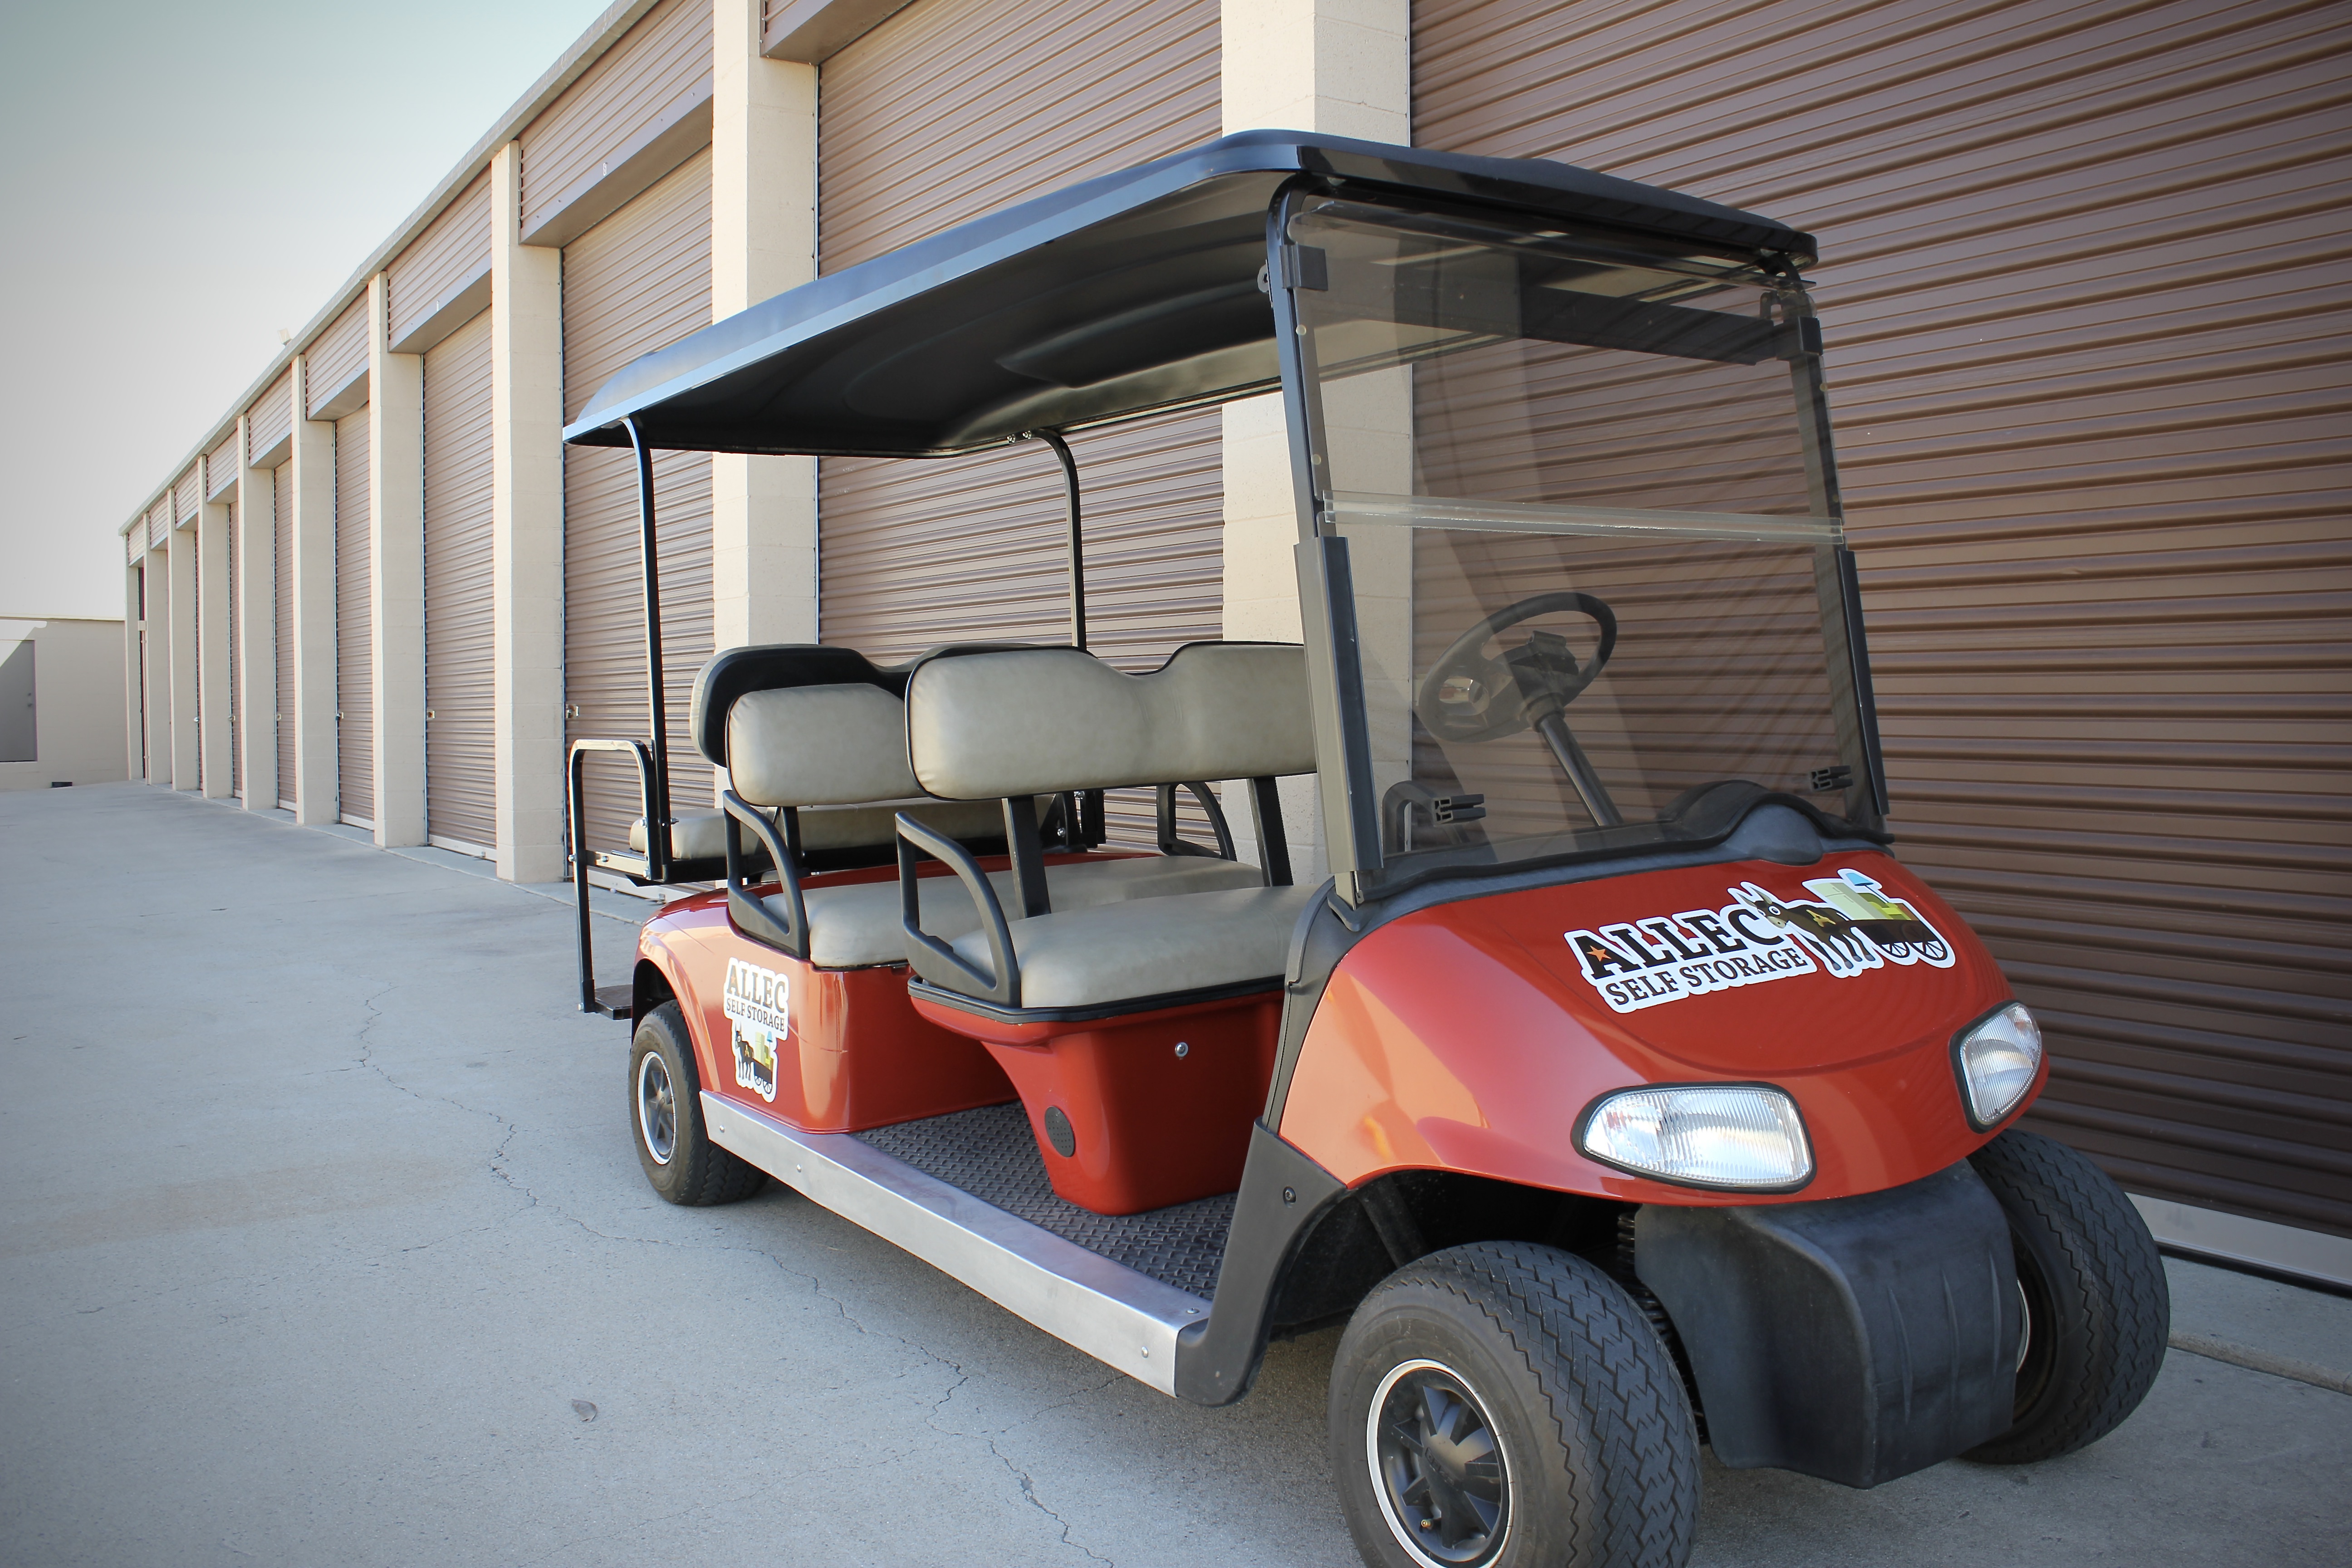 Allec Self Storage golf cart available for use